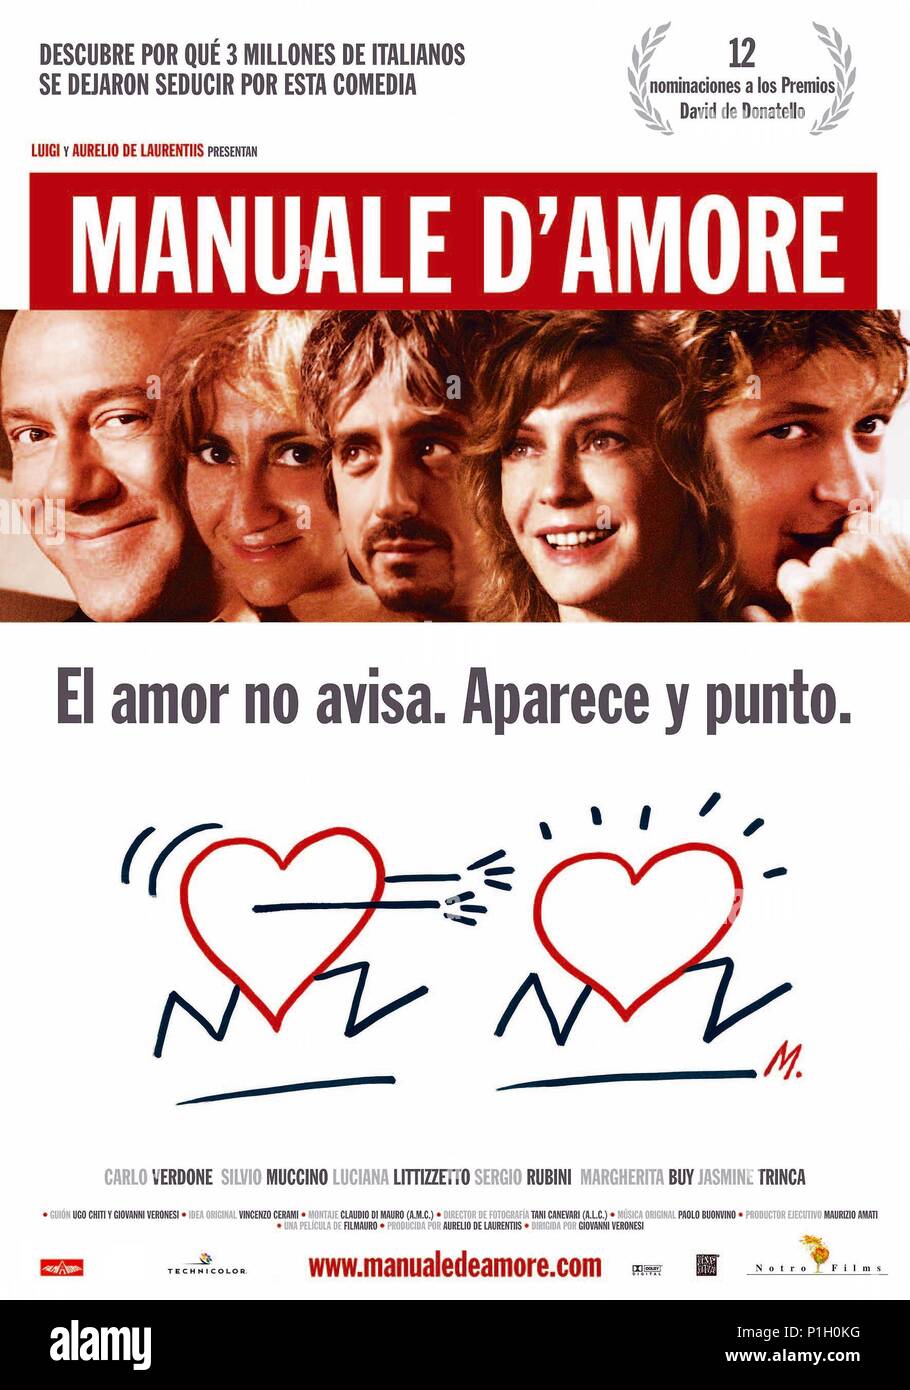 Manuale d’Amore